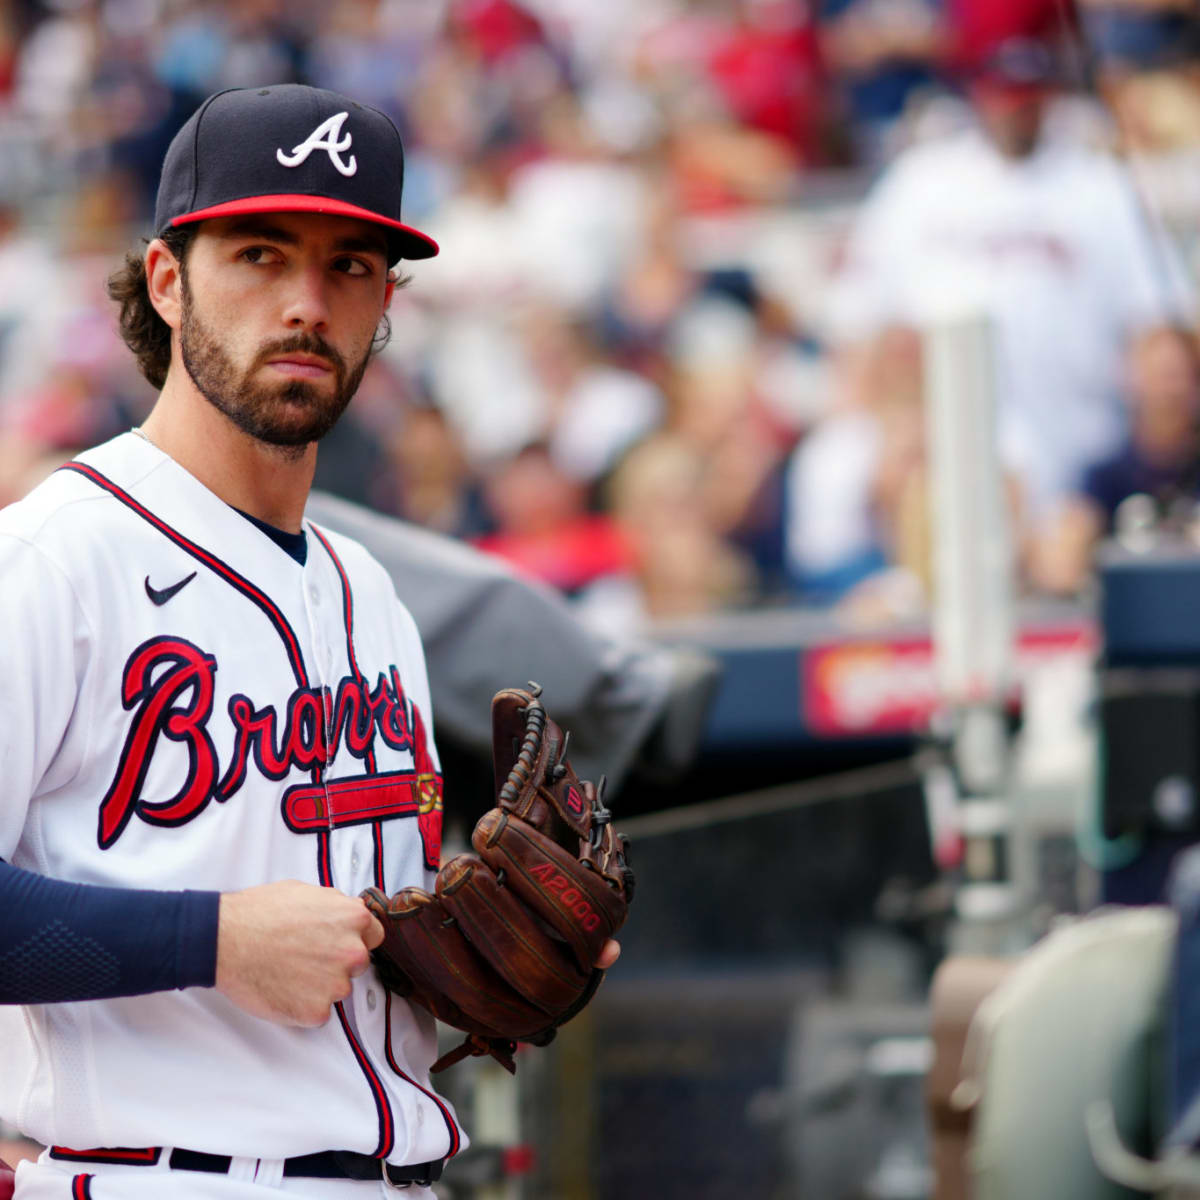 Dansby Swanson - 2019 FULL Highlights 